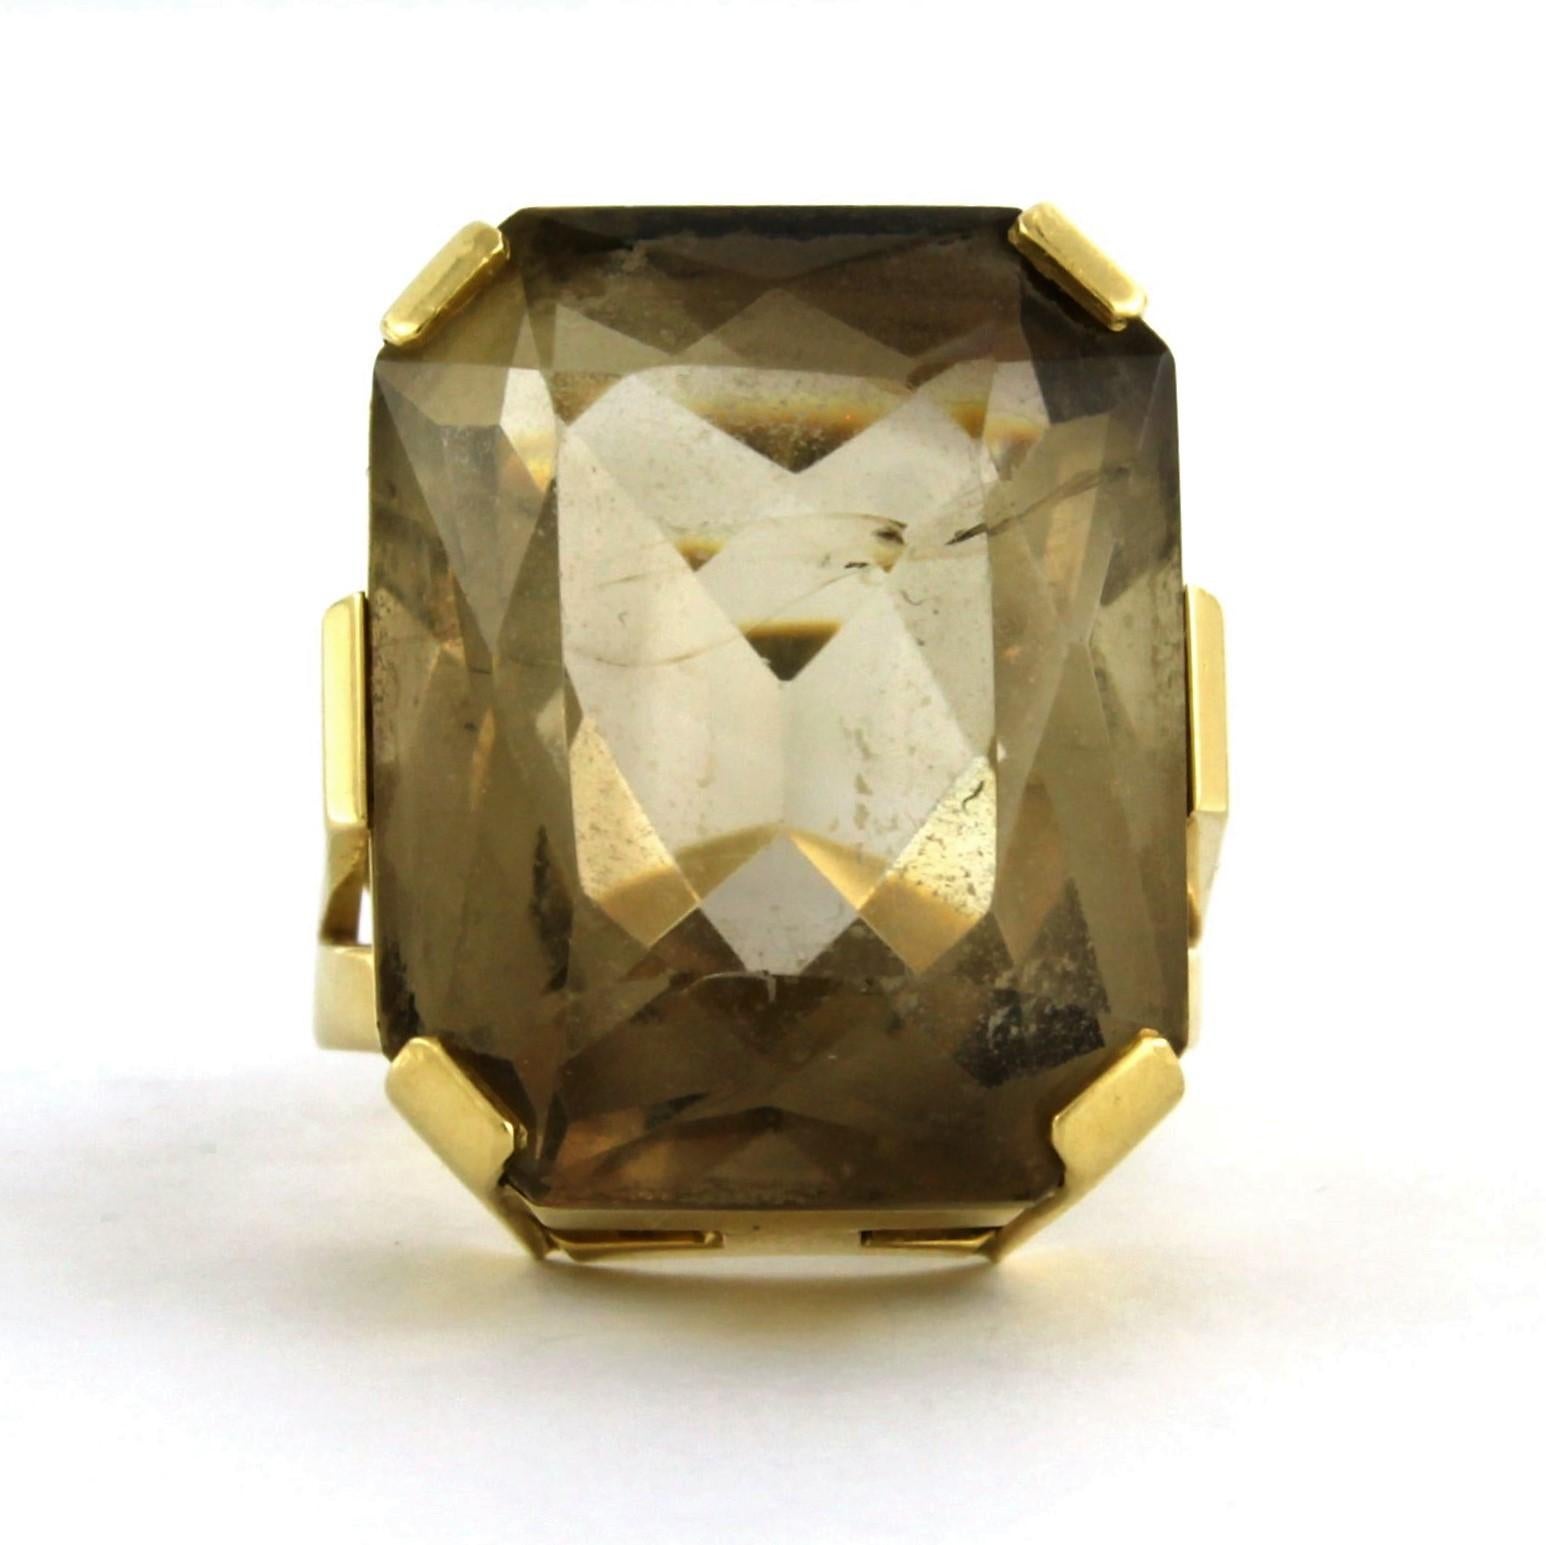 18 kt yellow entourage ring set with smoke topaz, approximately 10.0 ct in total - ring size US. 6.5 – EU. 17(53)

detailed description:

The top of the ring is in an oval shape measuring 2.1 cm by 1.8 cm wide by 1.0 cm high

Ring size US 6.5 – EU.